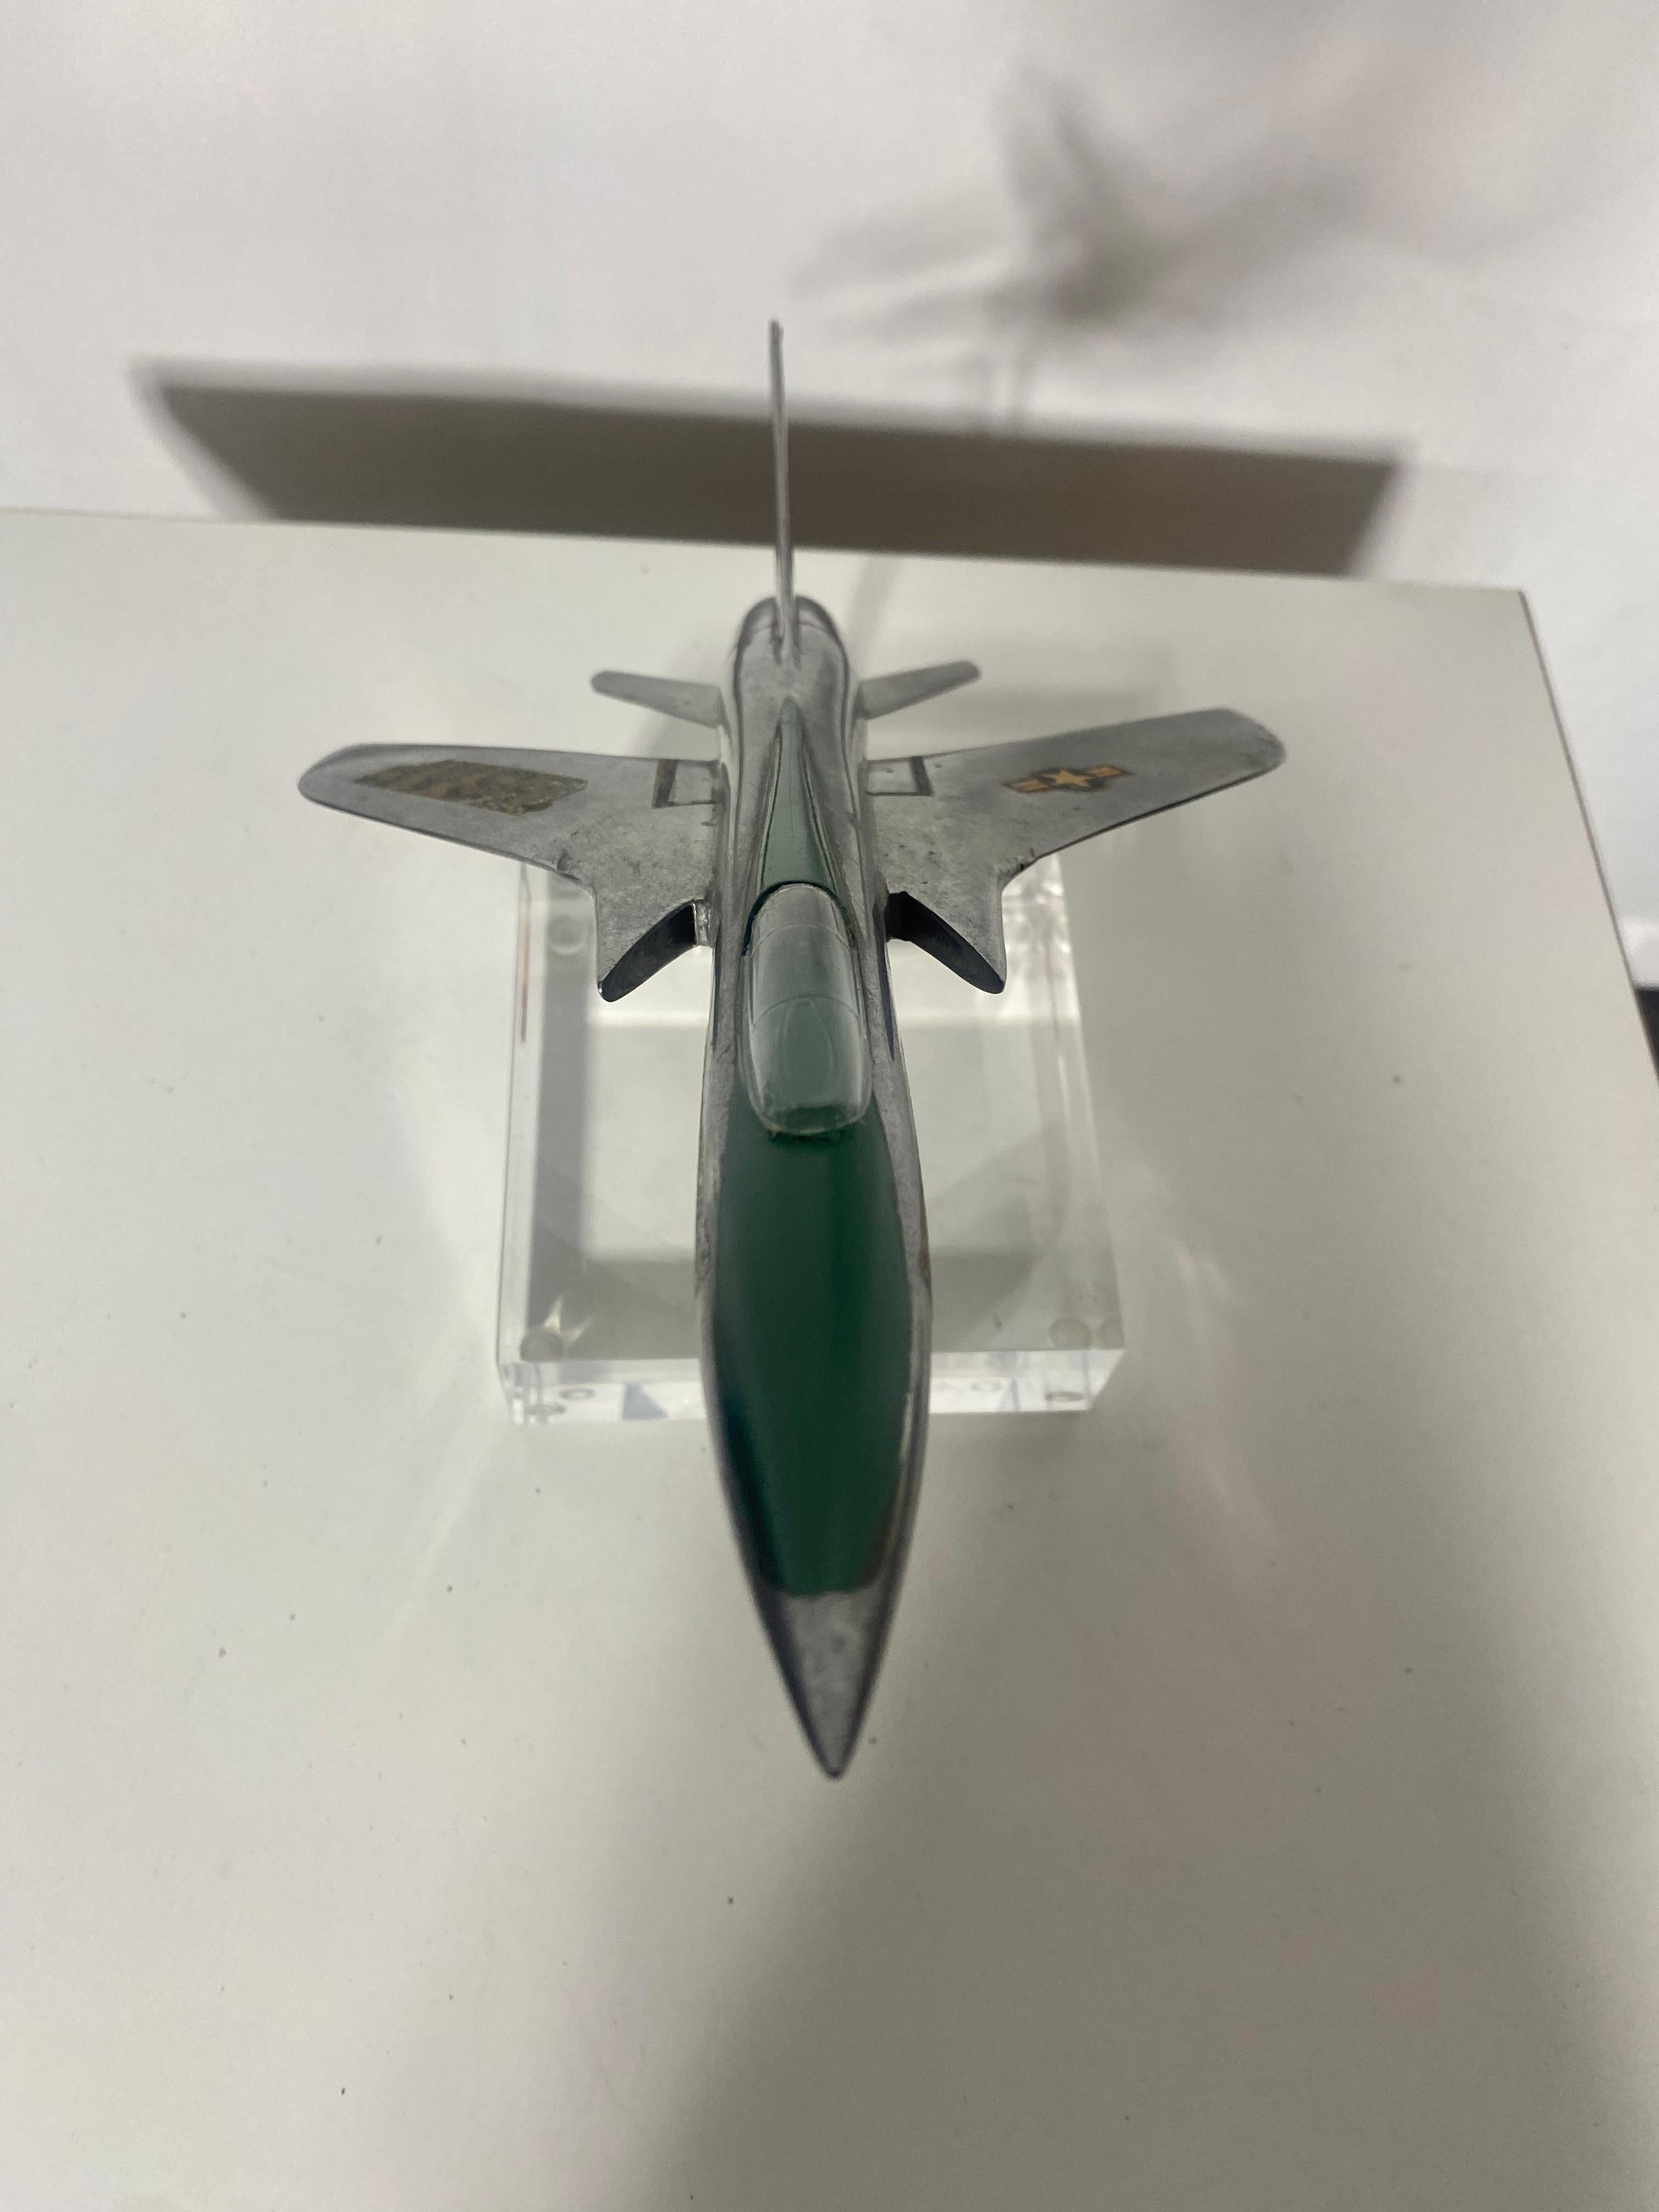 Mid Century Modern Aluminum and Lucite Fighter Jet . Airplane model THUNDERCHEIF F-105 / Desk accessory / Sculpture, made by Topping Models.